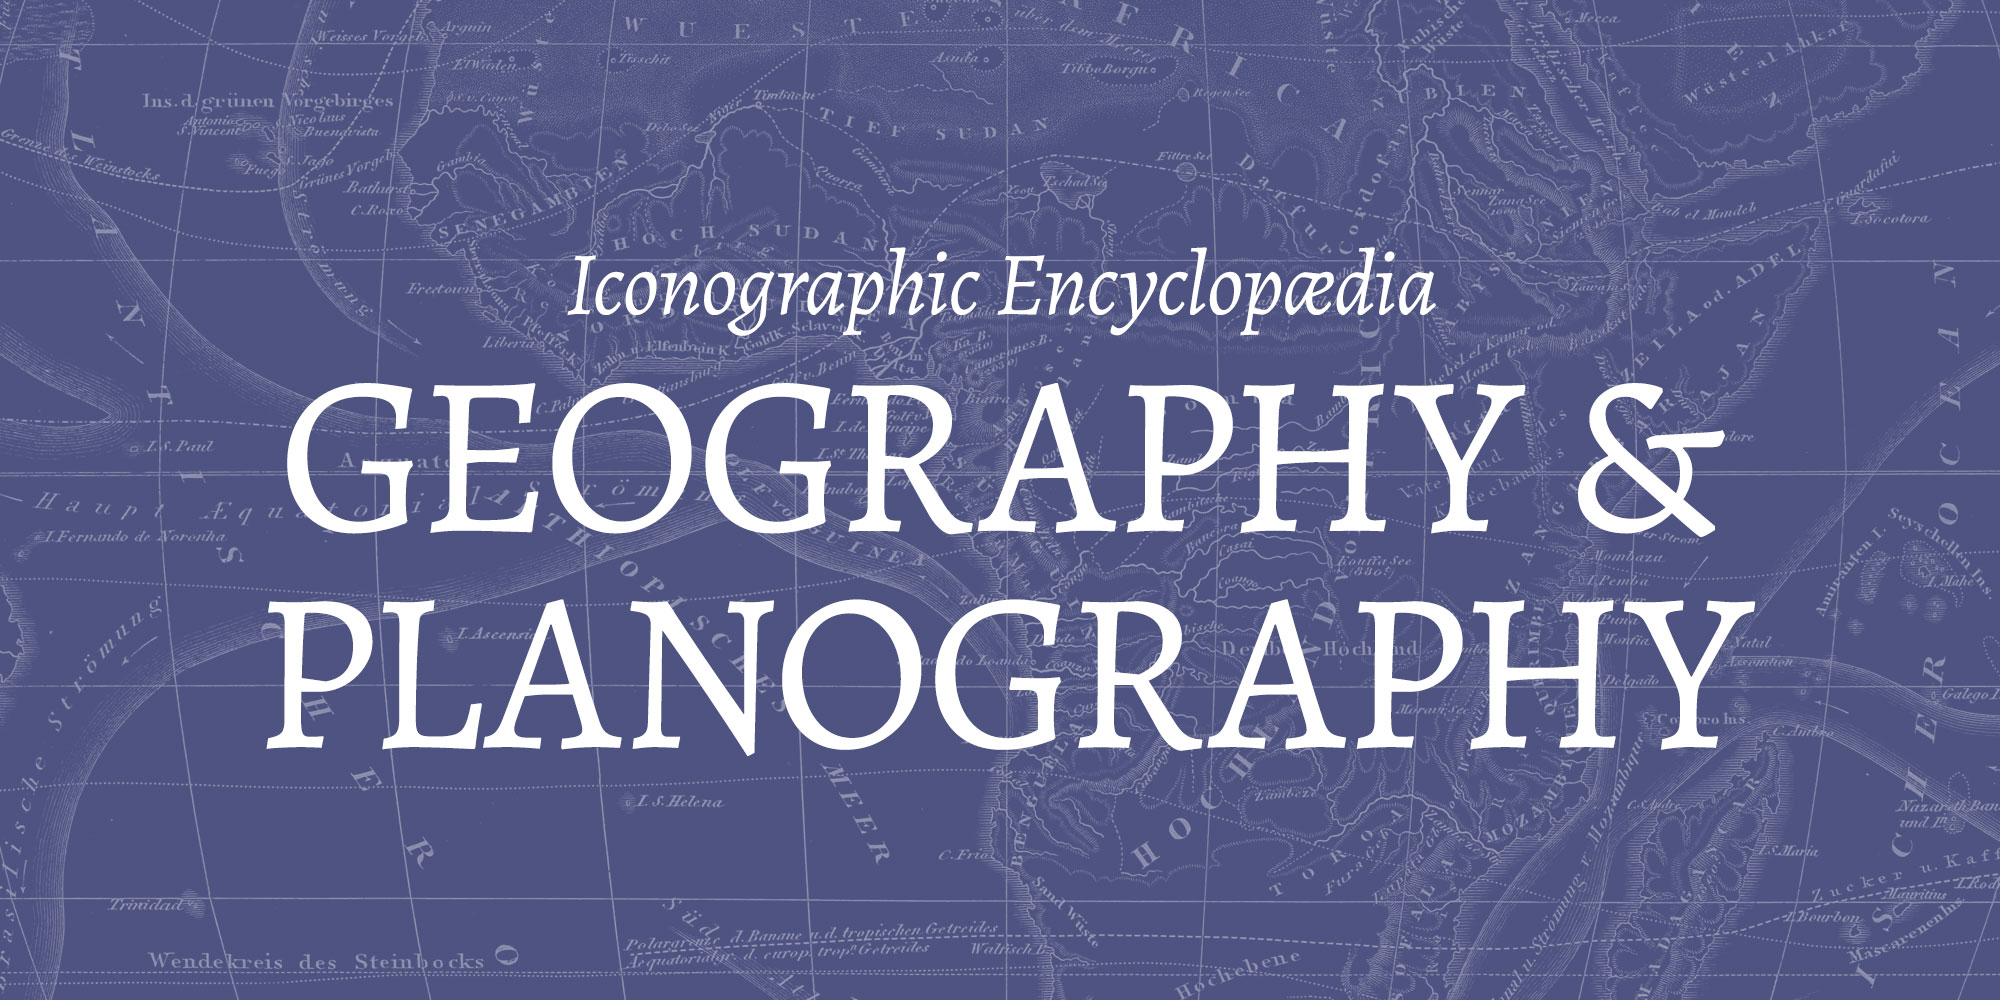 Geography & Planography - Iconographic Encyclopædia of Science, Literature,  and Art